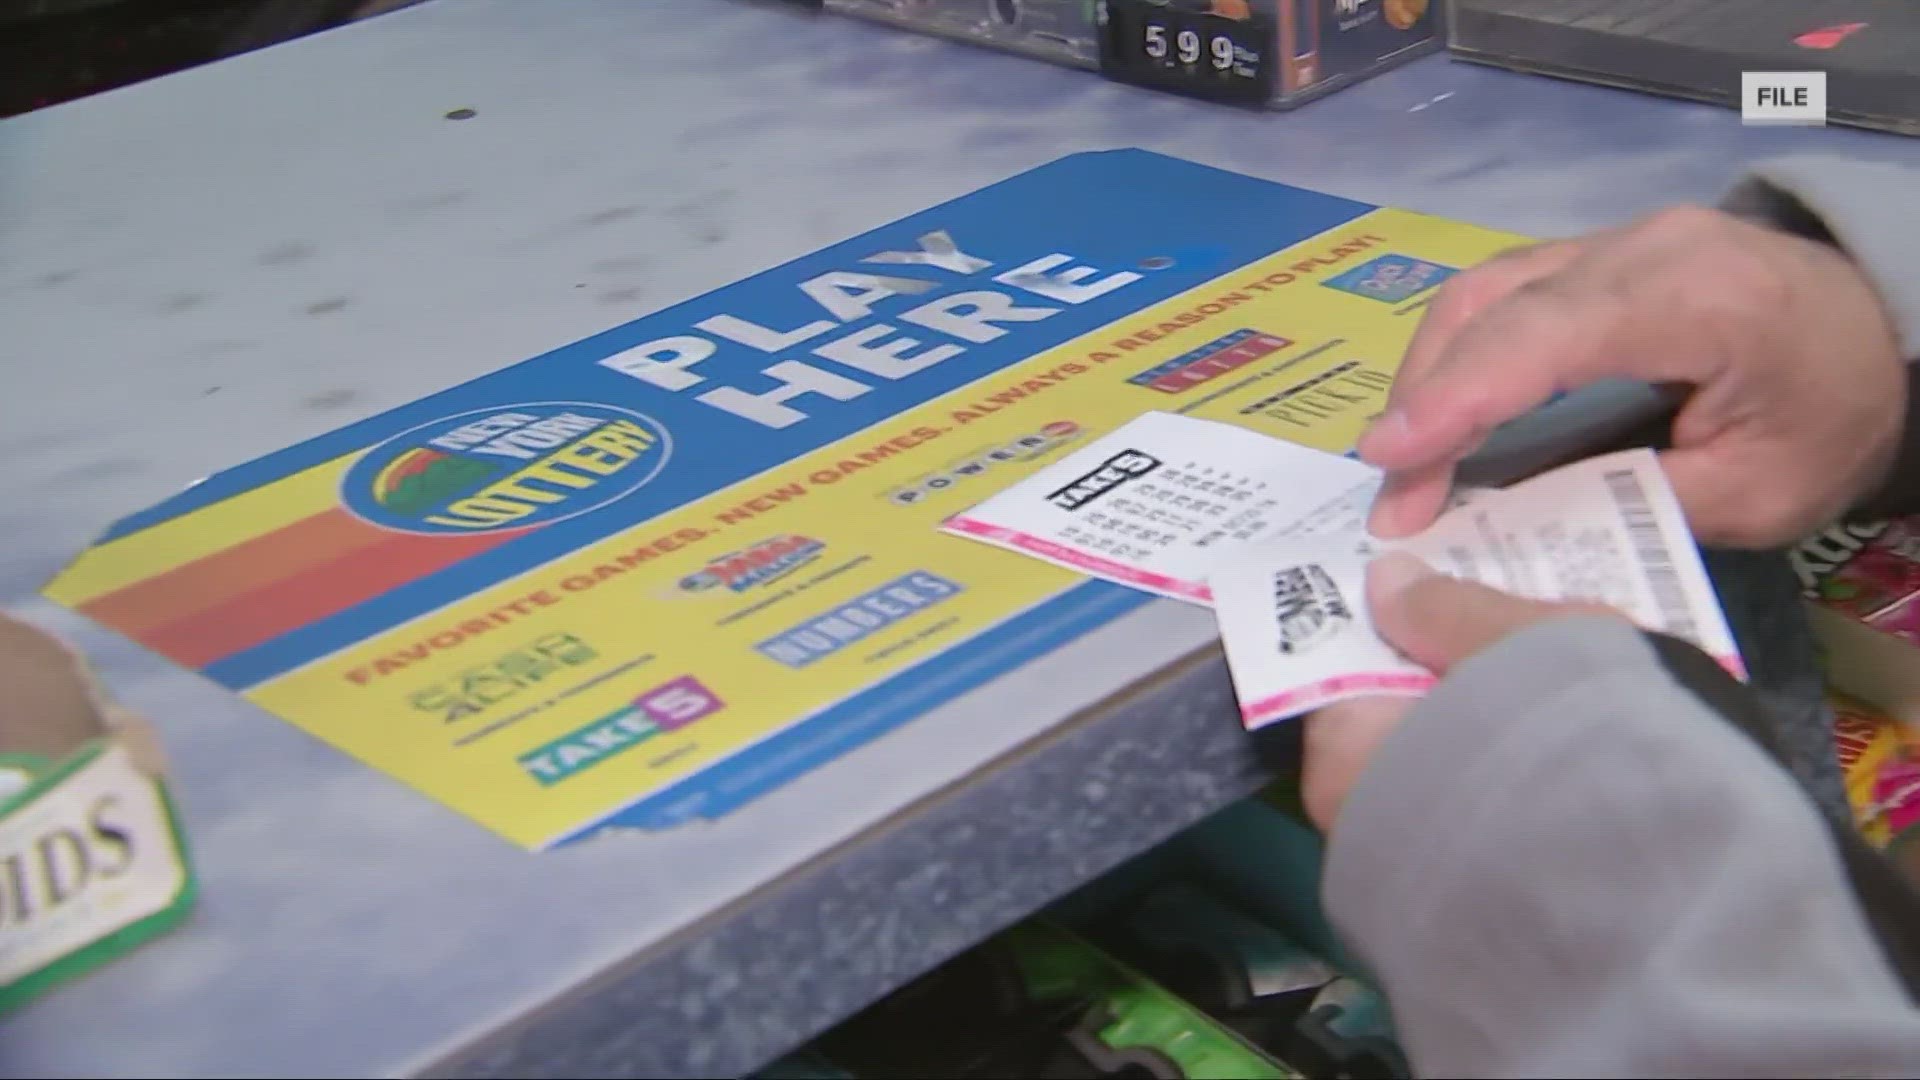 A $1 million Mega Millions ticket and a $5.5 million Classic Lotto ticket were both sold recently in Northeast Ohio.